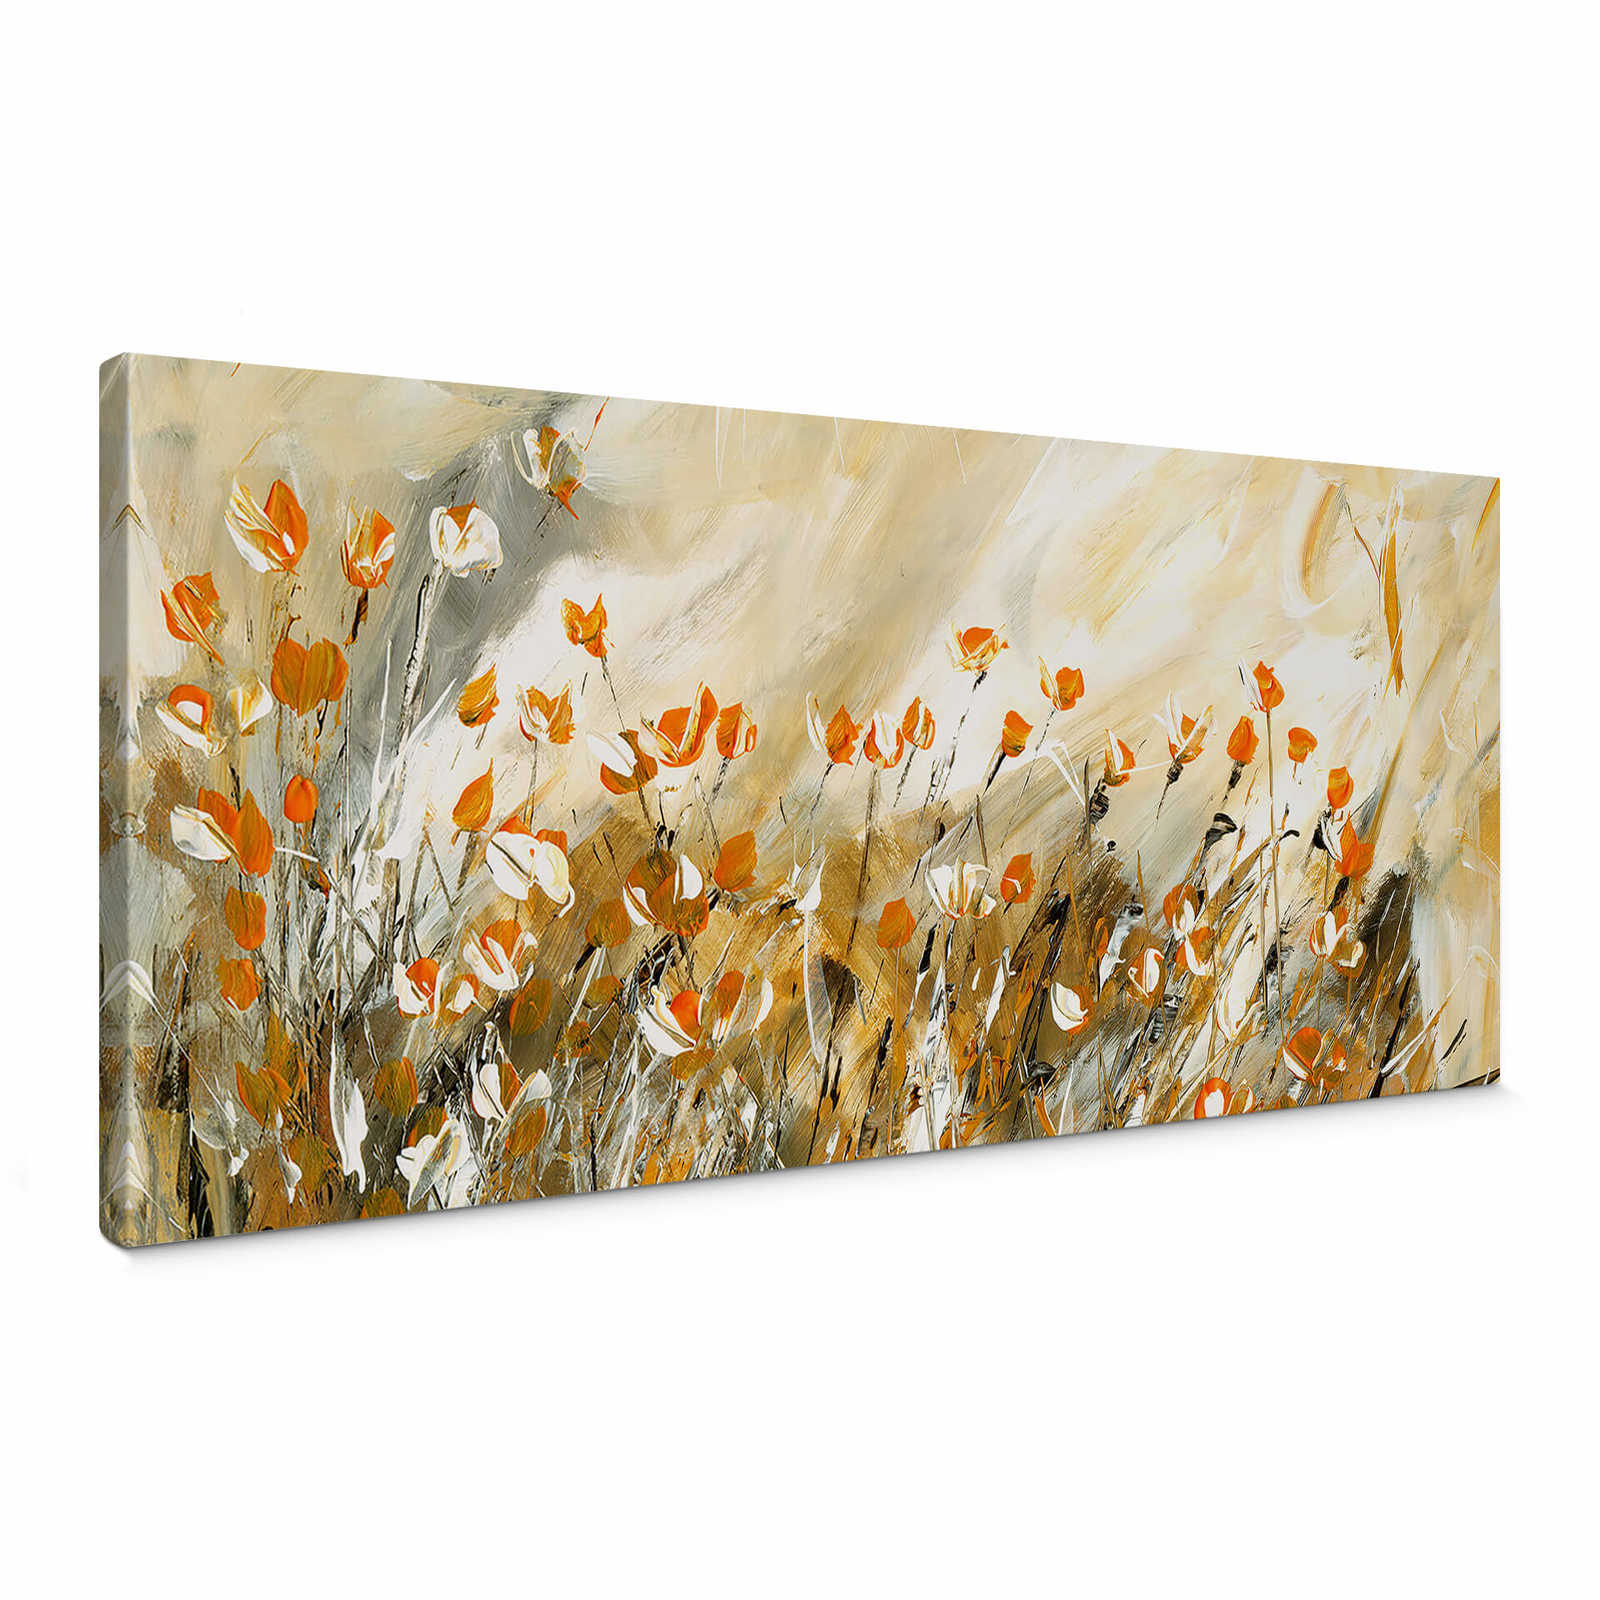 Panorama canvas painting golden flower meadow by Kiksic
